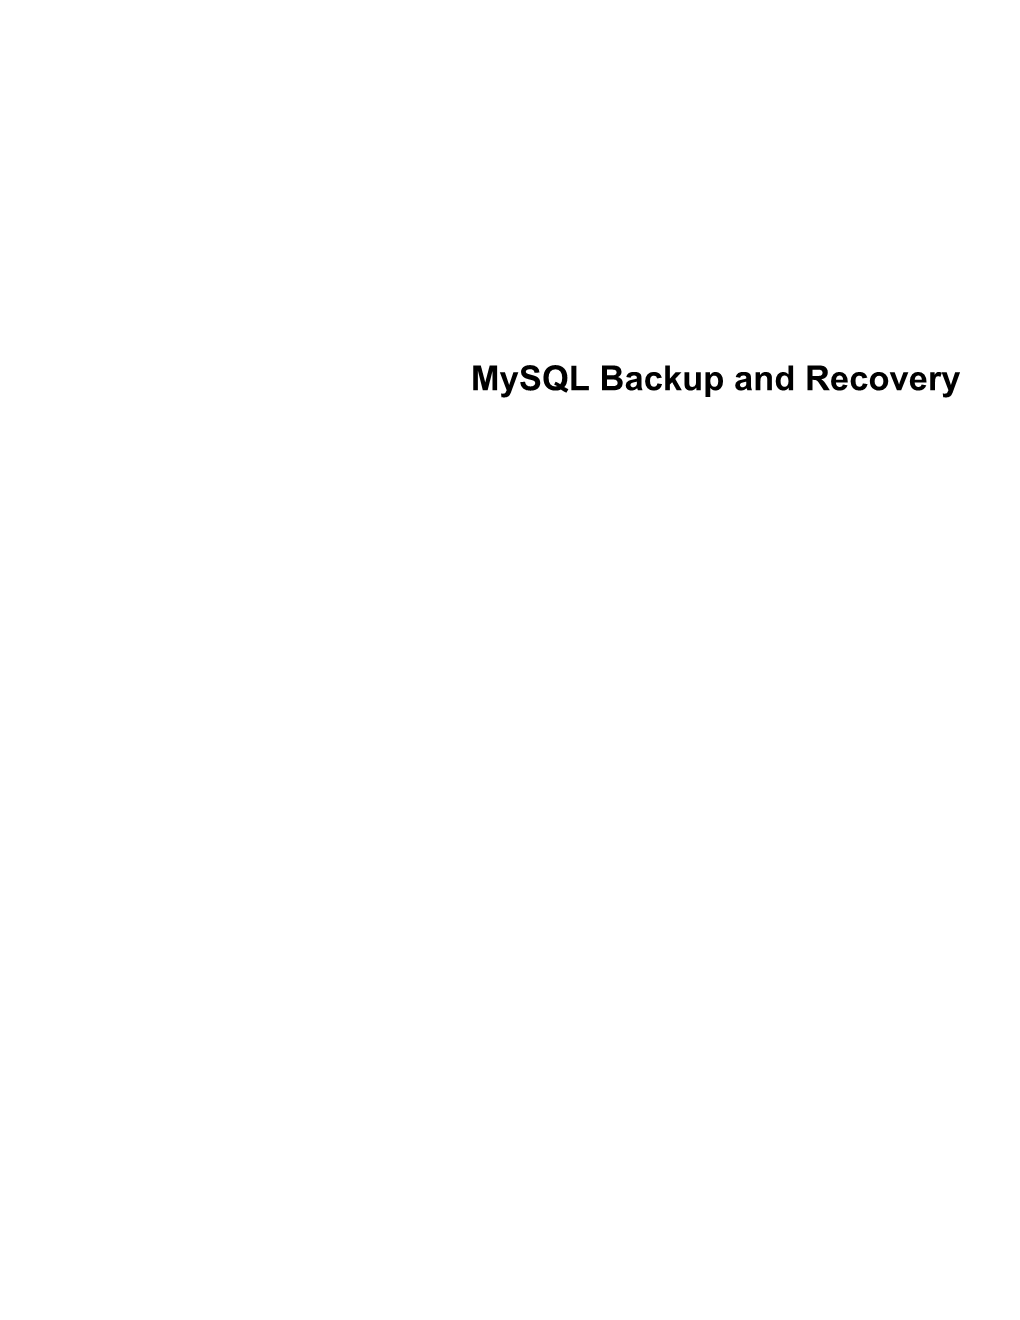 Mysql Backup and Recovery Abstract